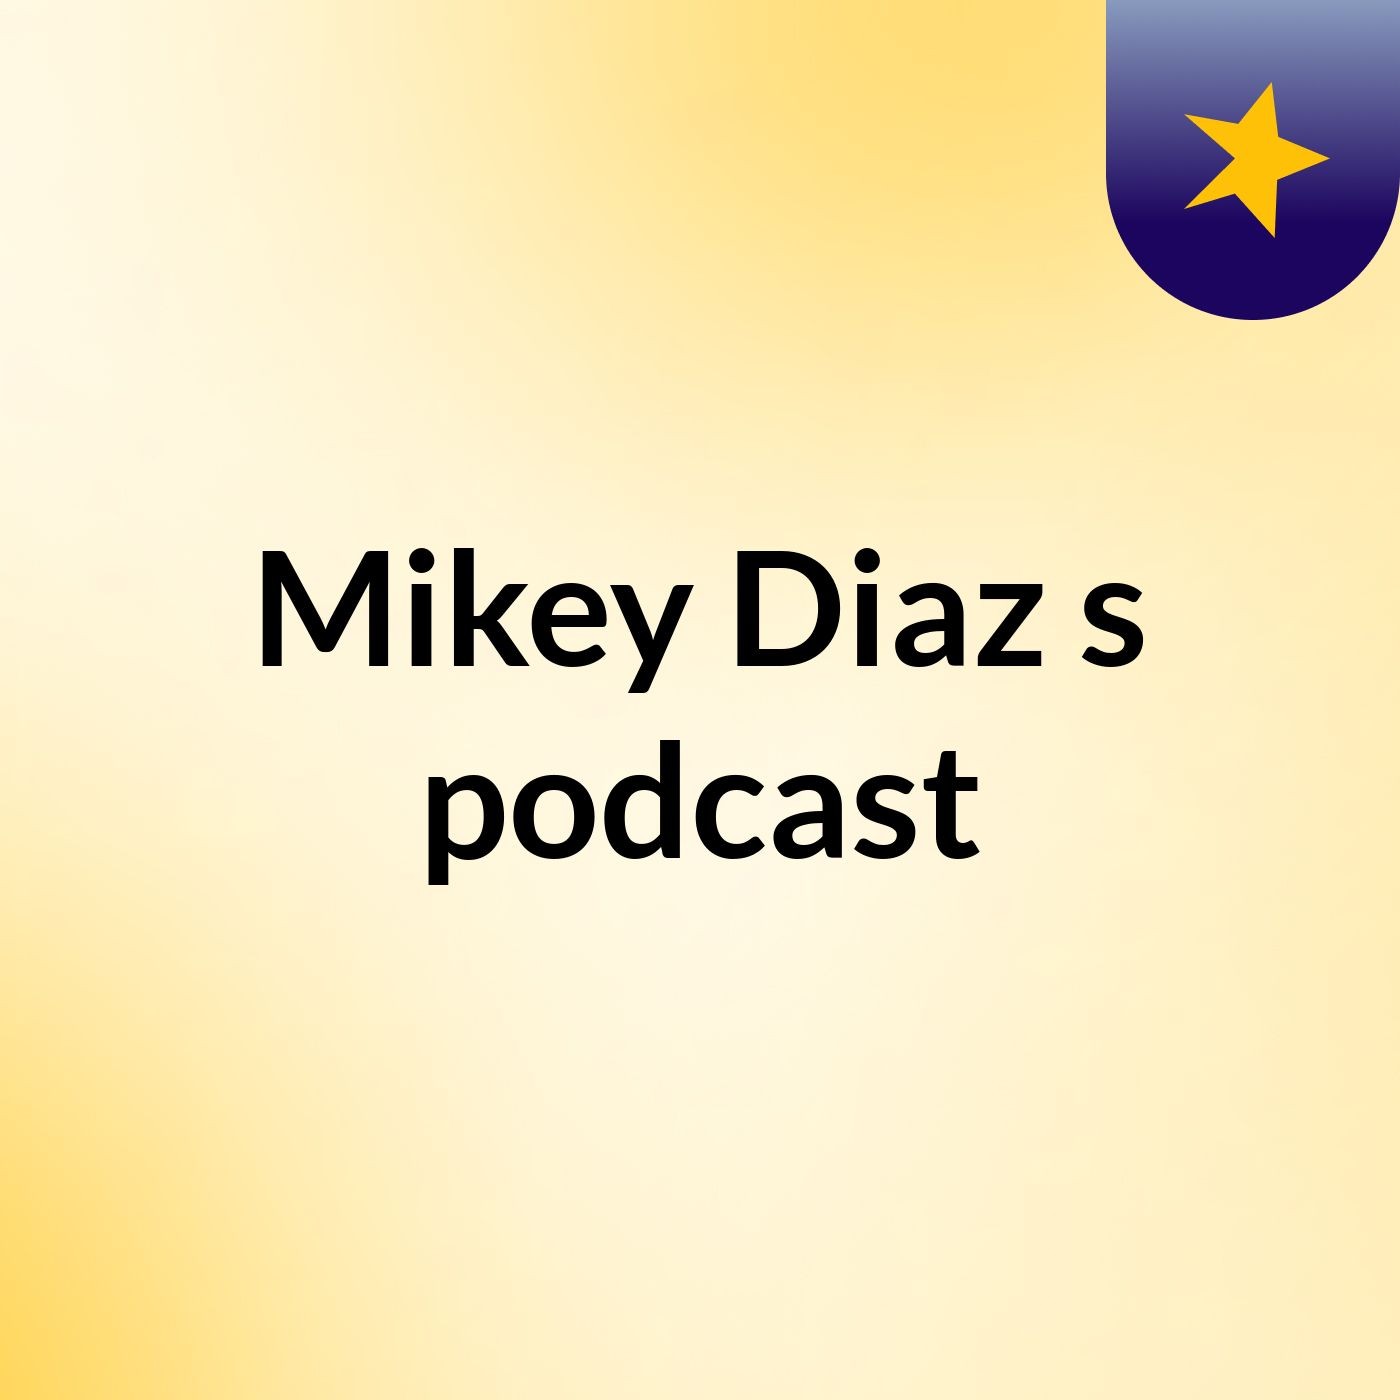 Episode 2 - Mikey Diaz's podcast